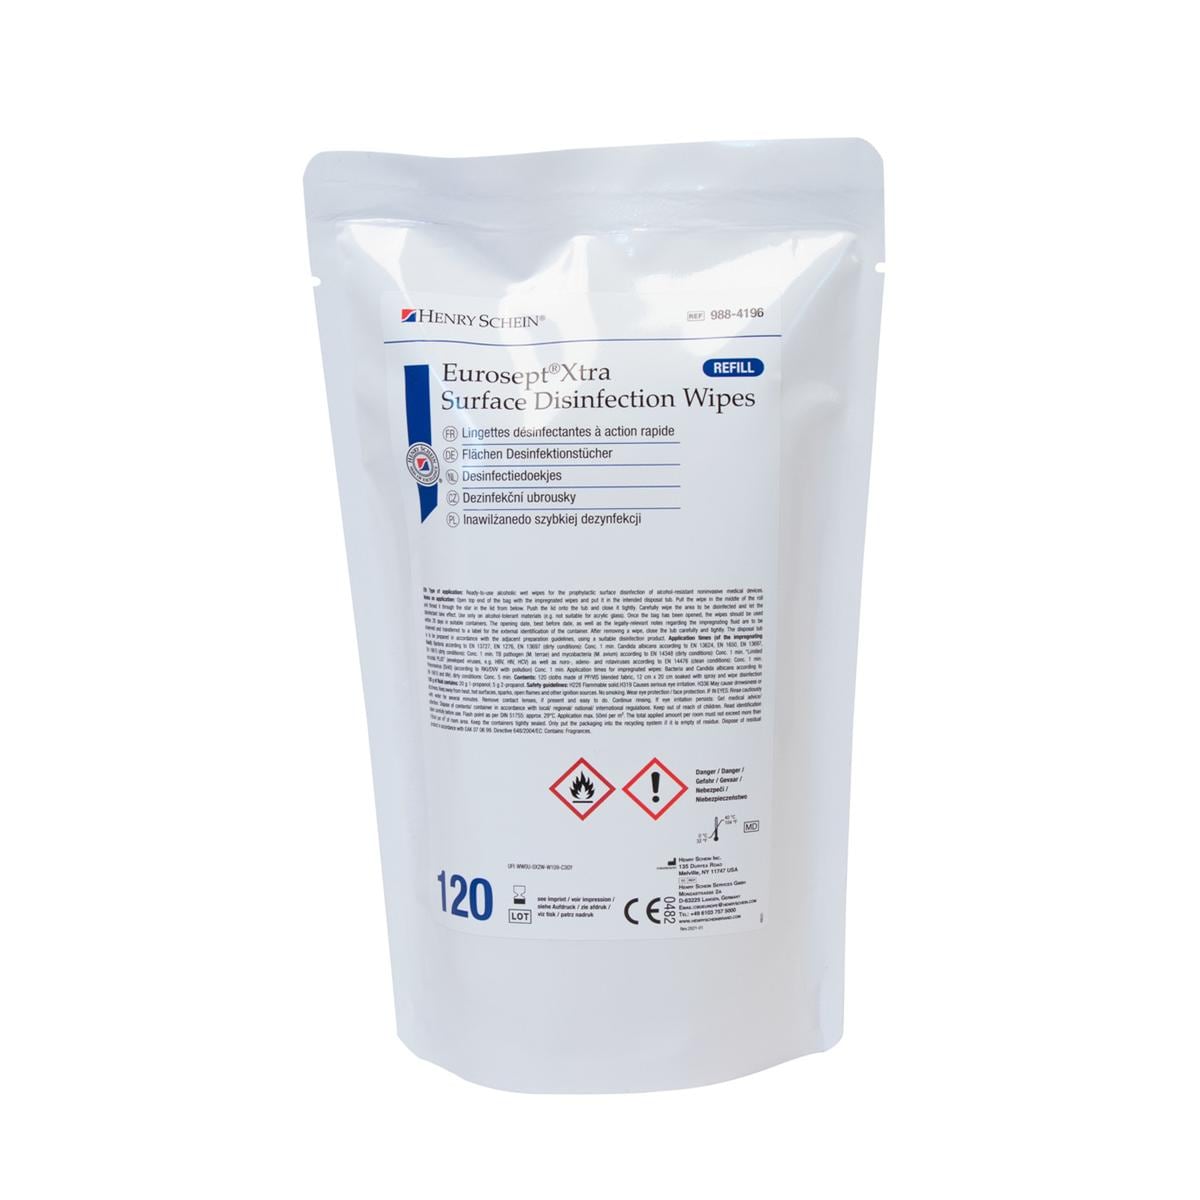 EuroSept Xtra Surface Disinfection Wipes XS - Navulling,120 wipes, 13 x 20 cm